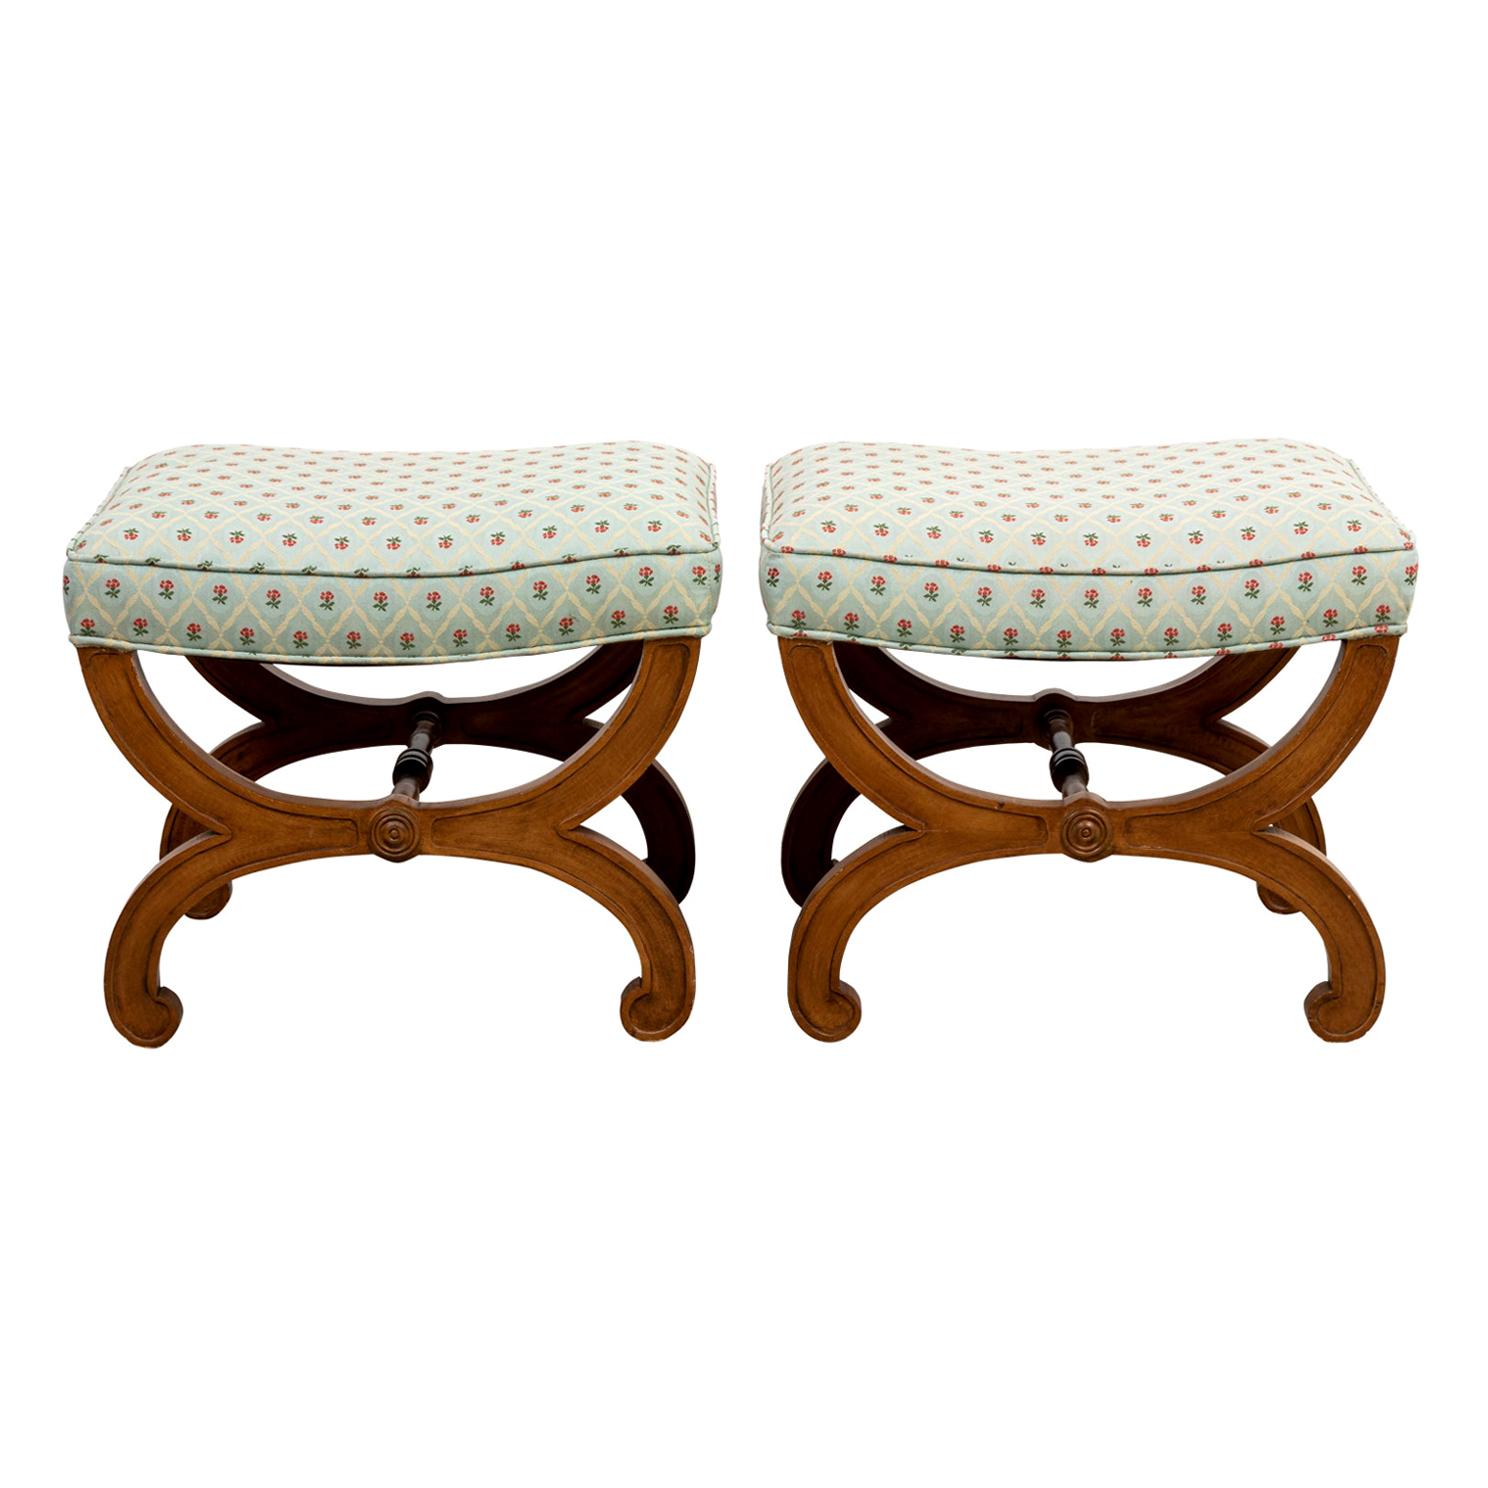 Pair of Upholstered French Yew Wood Curule Benches